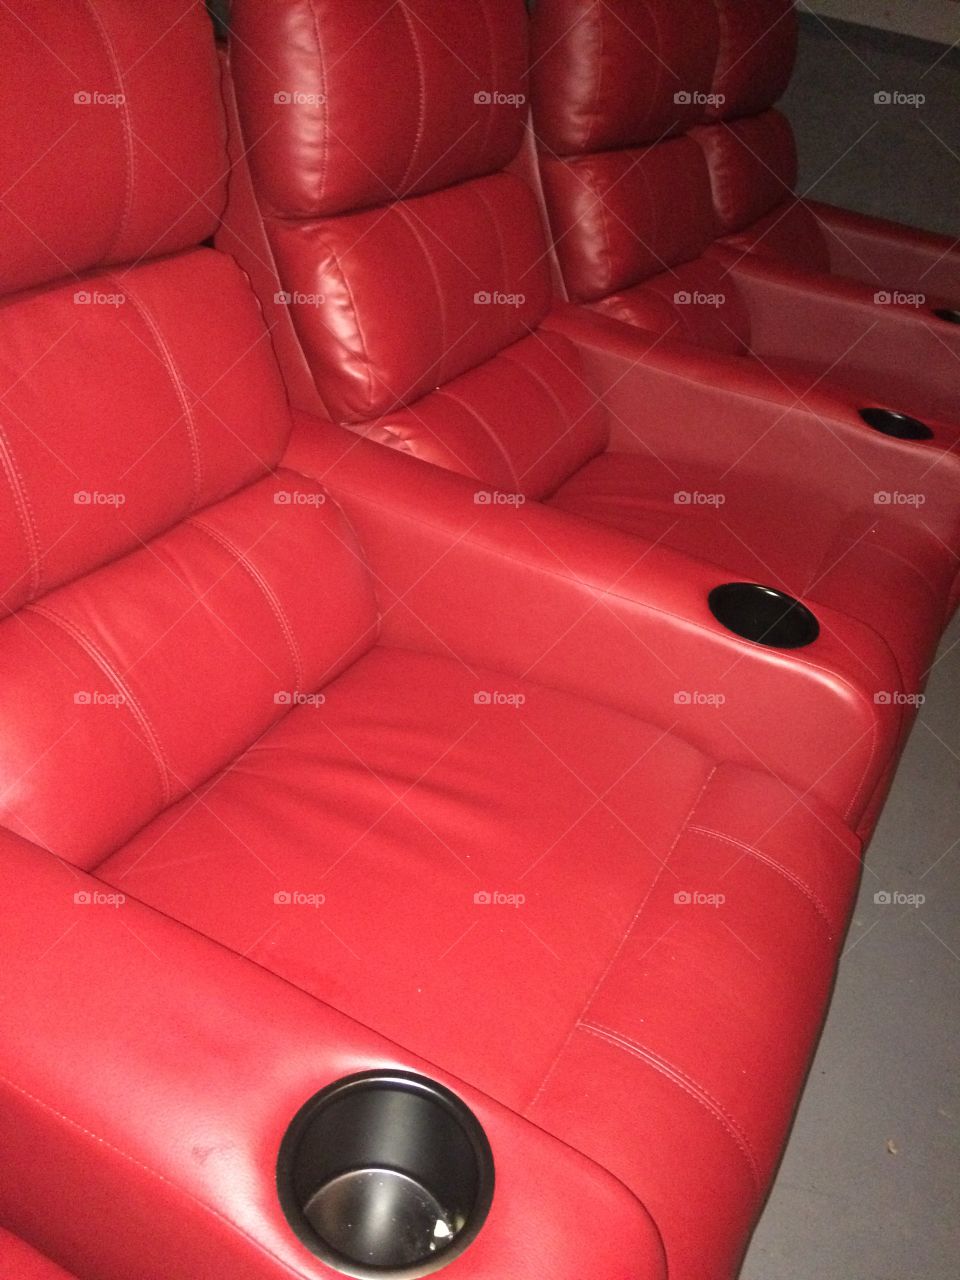 Seat, No Person, Leather, Sofa, Indoors